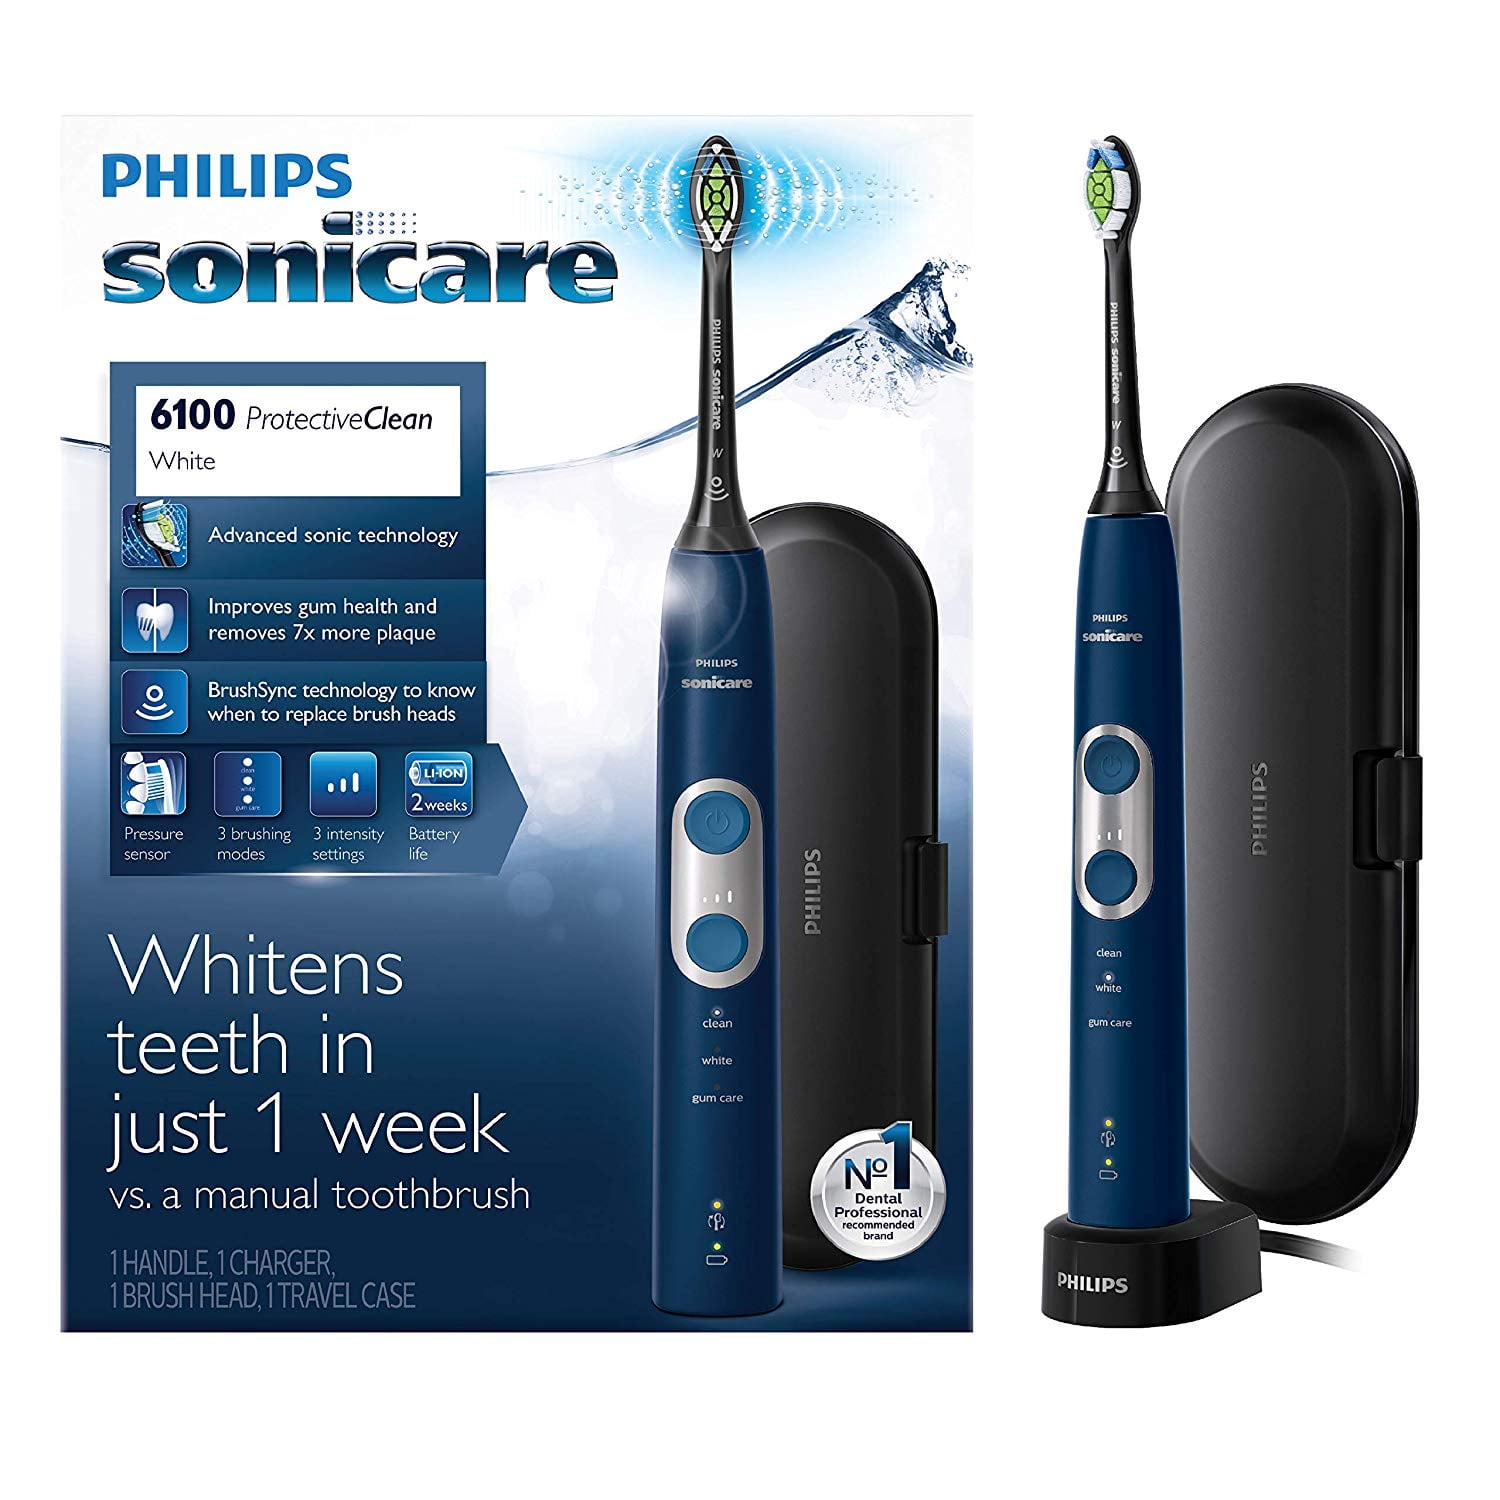 philips-sonicare-protectiveclean-6100-rechargeable-electric-toothbrush